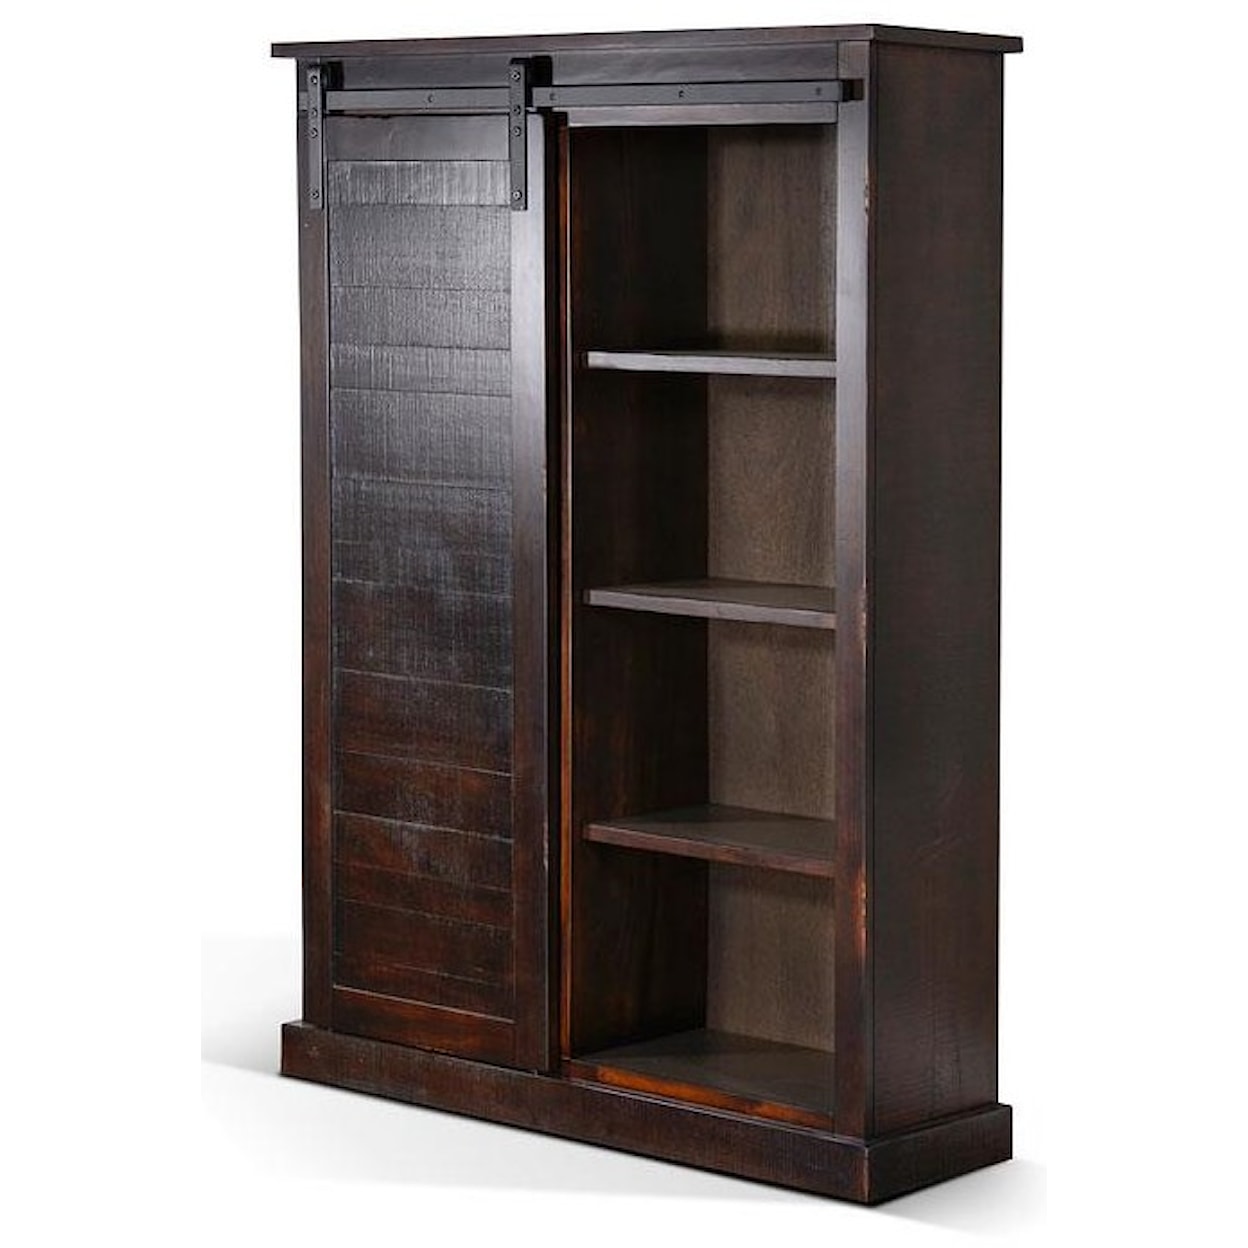 Sunny Designs Country View Country View Bookcase